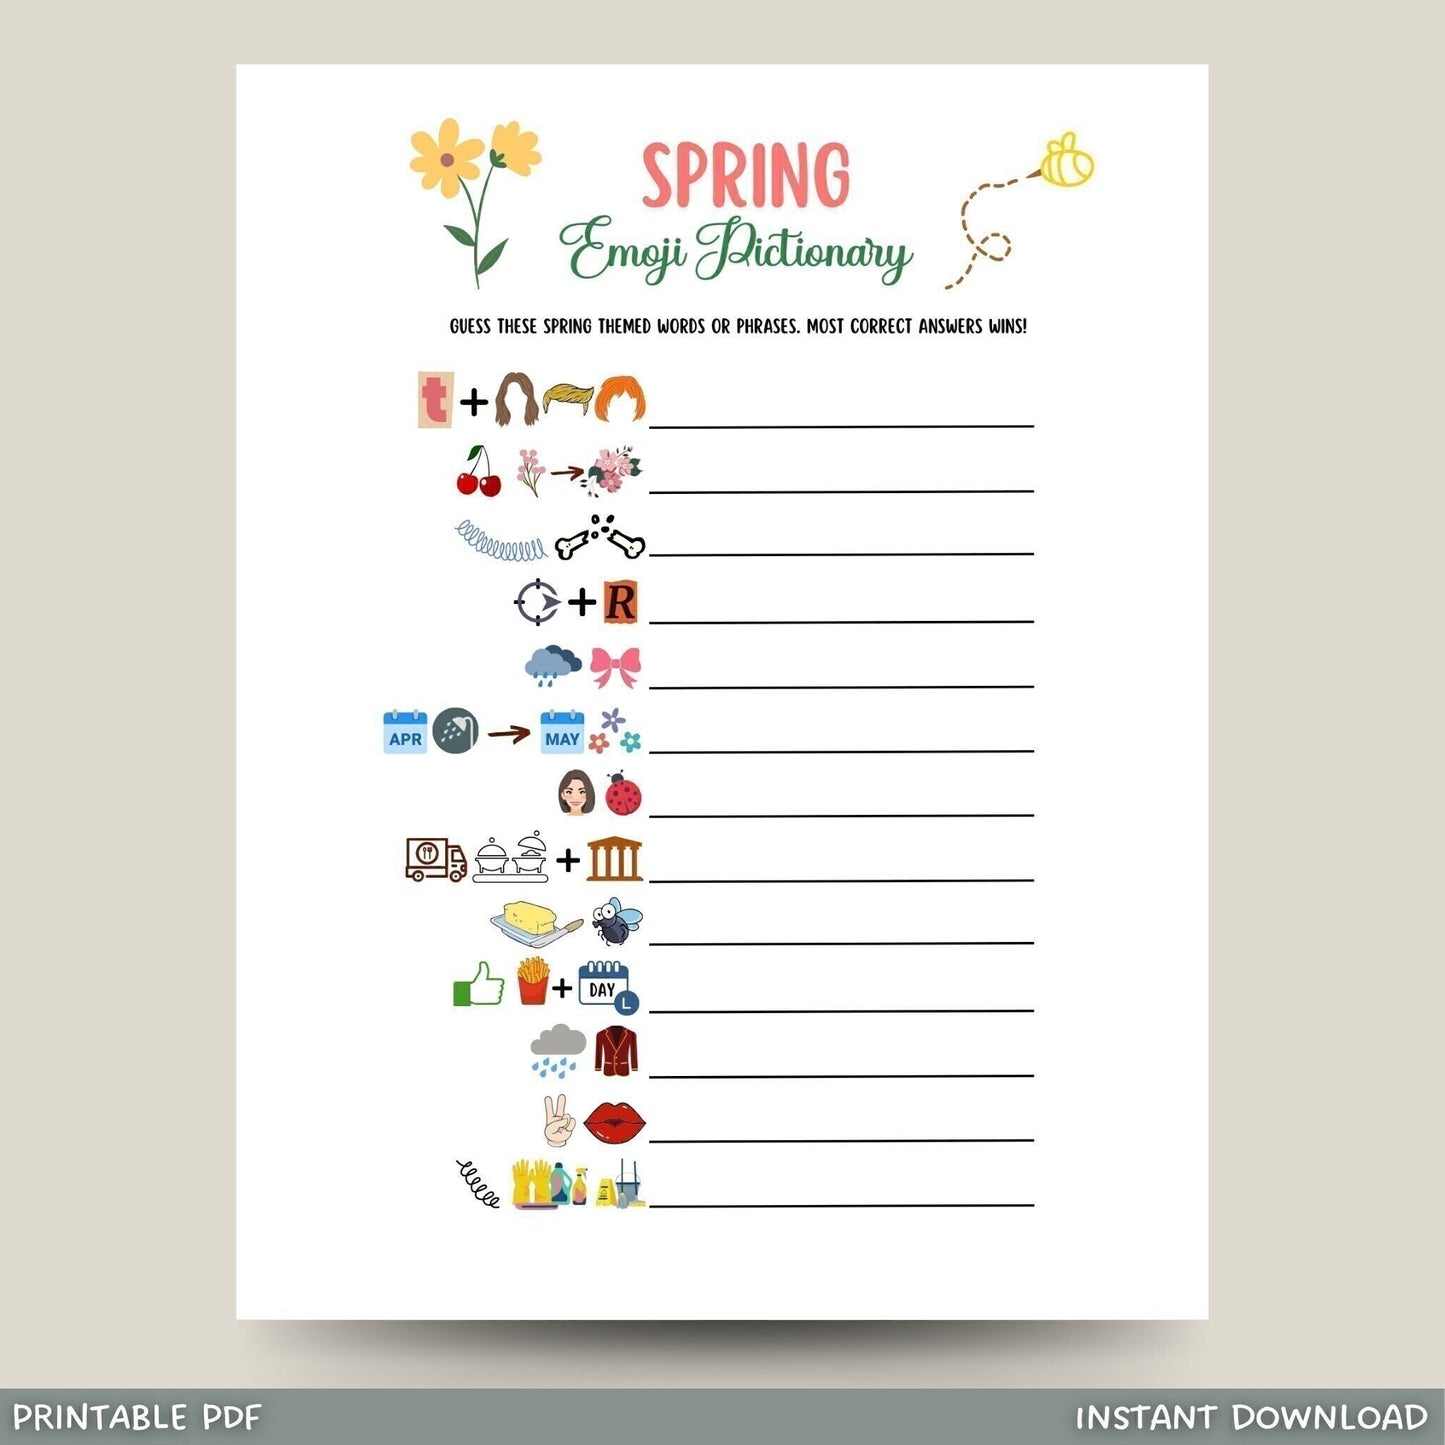 This spring emoji Pictionary game is printable & an instant download! It is perfect for your party & great to play with friends & family! It works well for an office party, dinner party, classroom game, adults & kids! Just download, print & play!